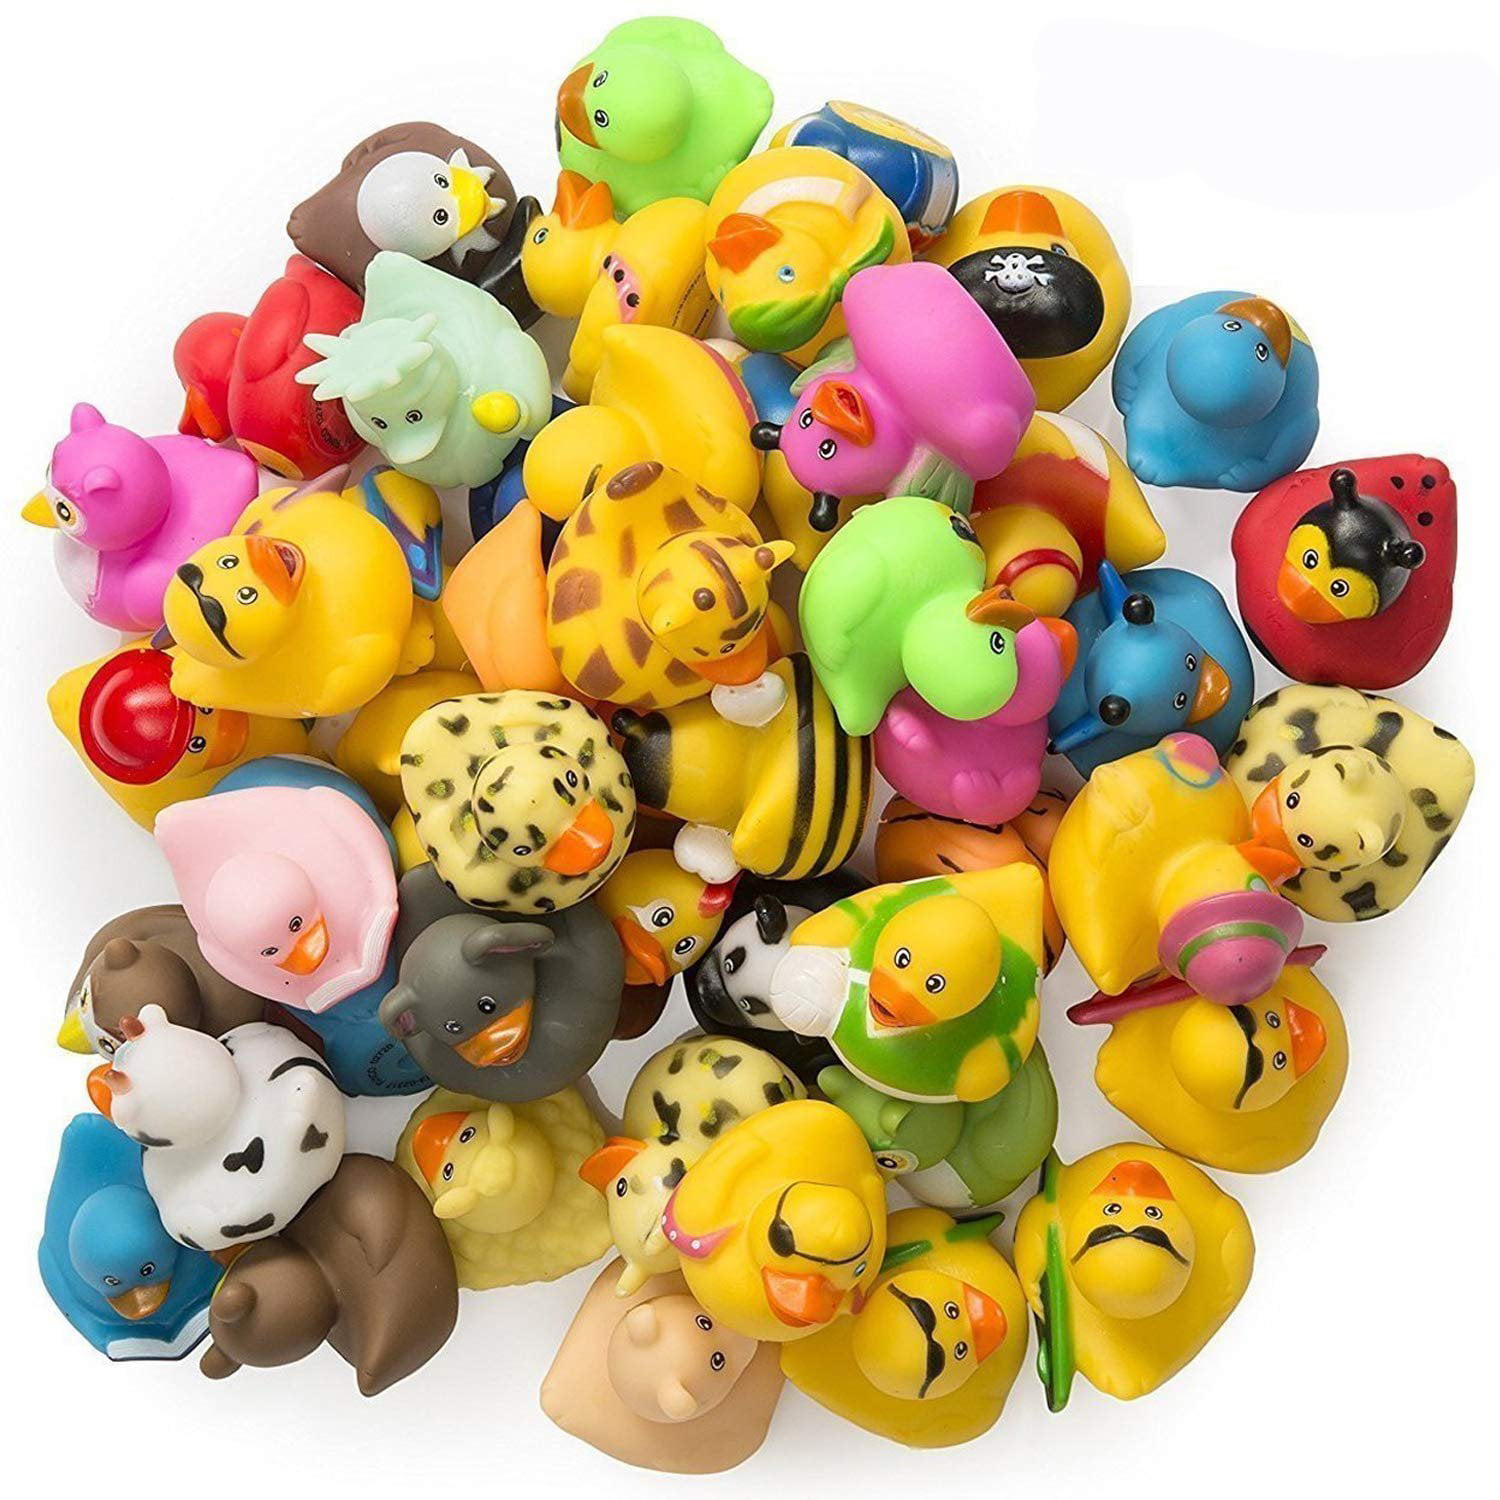 Birthdays Bath Time and More Fight Together 100 Pack Rubber Duck Bath Toy Assortment Bulk Floater Duck for Kids Party Favors Baby Showers Accessories 100-Pack